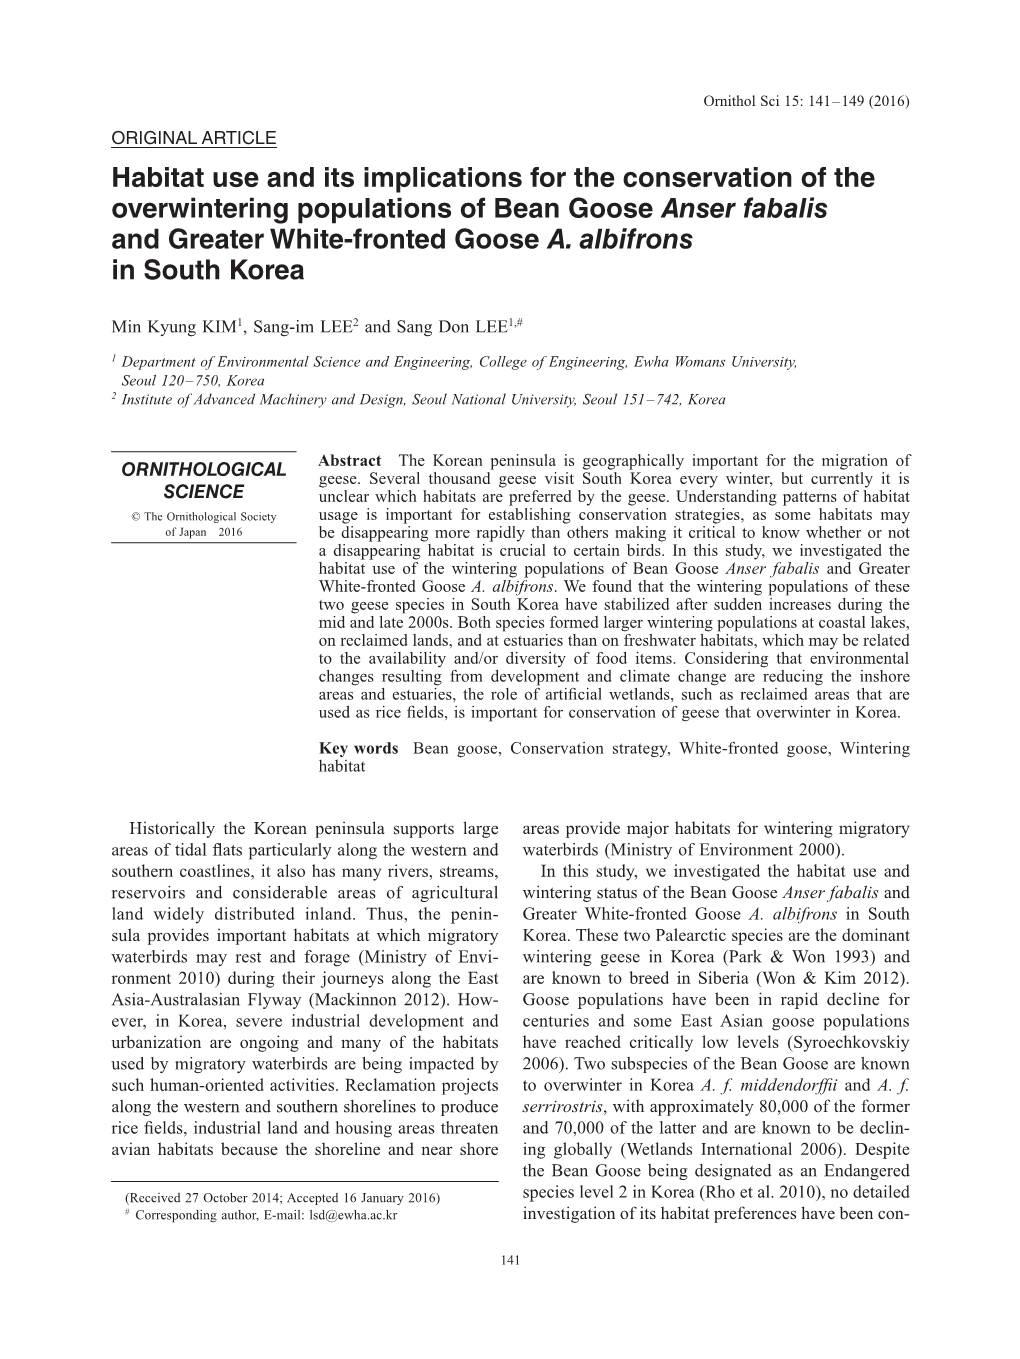 Habitat Use and Its Implications for the Conservation of the Overwintering Populations of Bean Goose Anser Fabalis and Greater White-Fronted Goose A